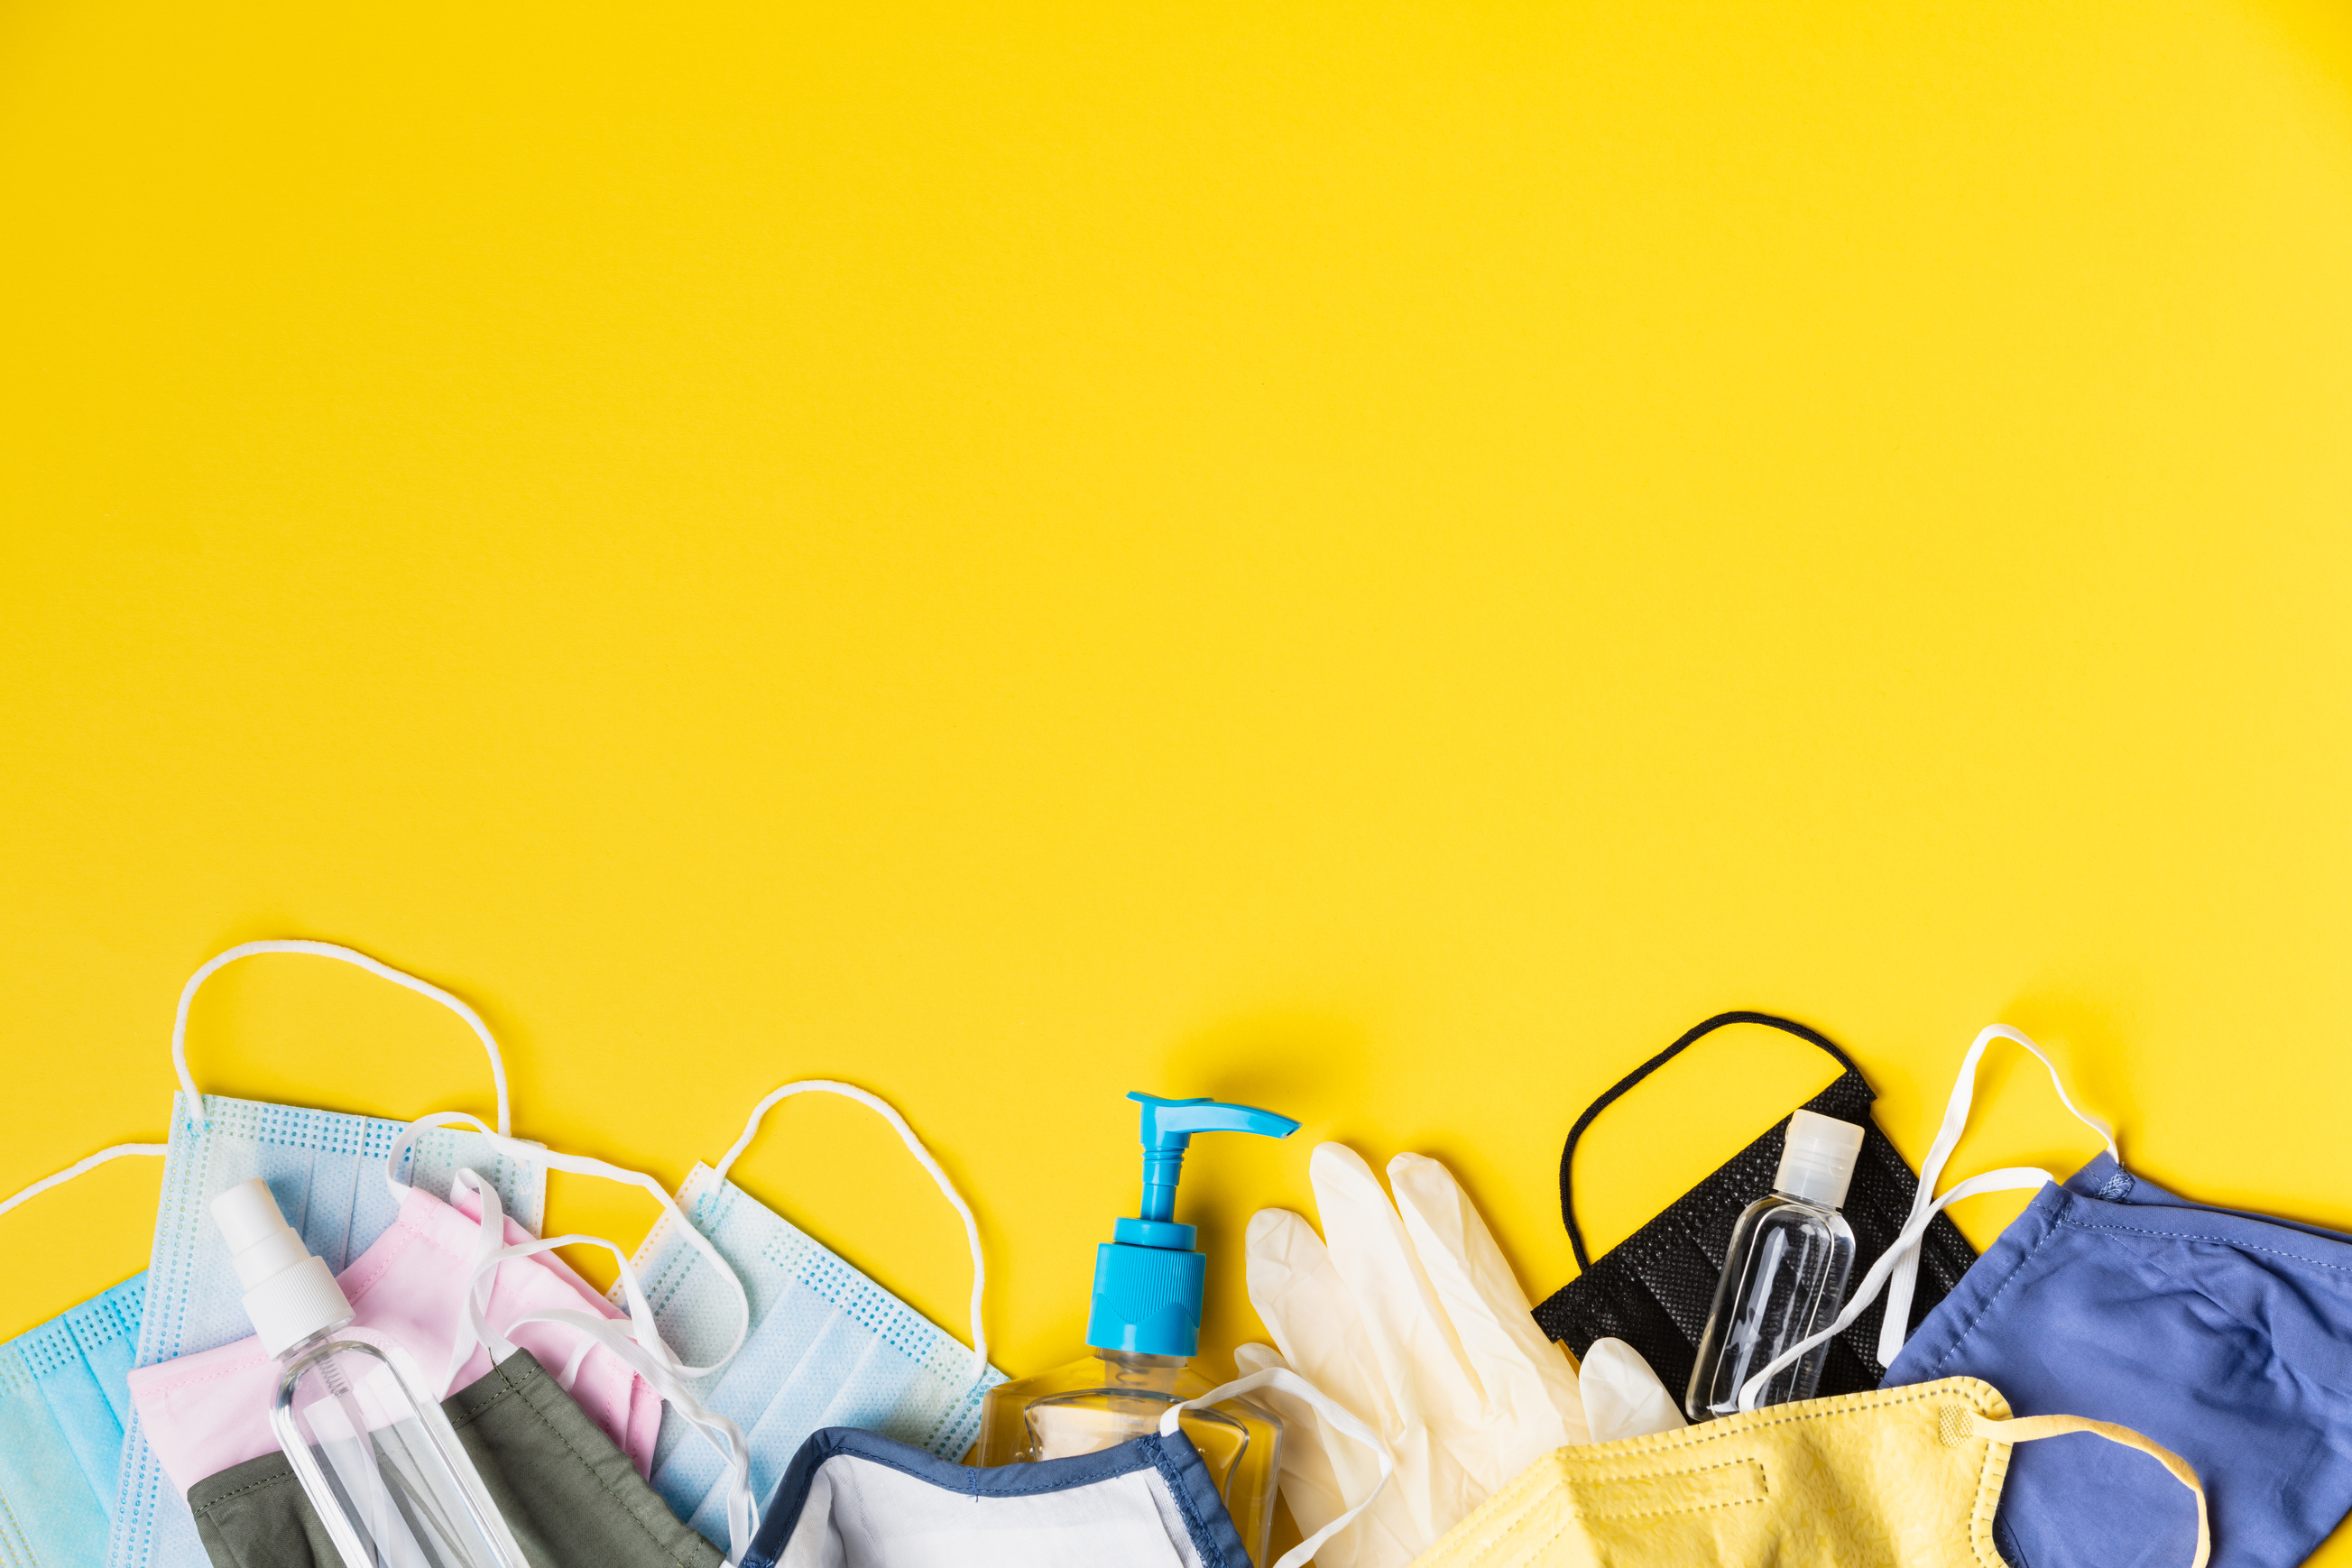 Face Masks, Gloves, and Hand Sanitizer on Yellow Background